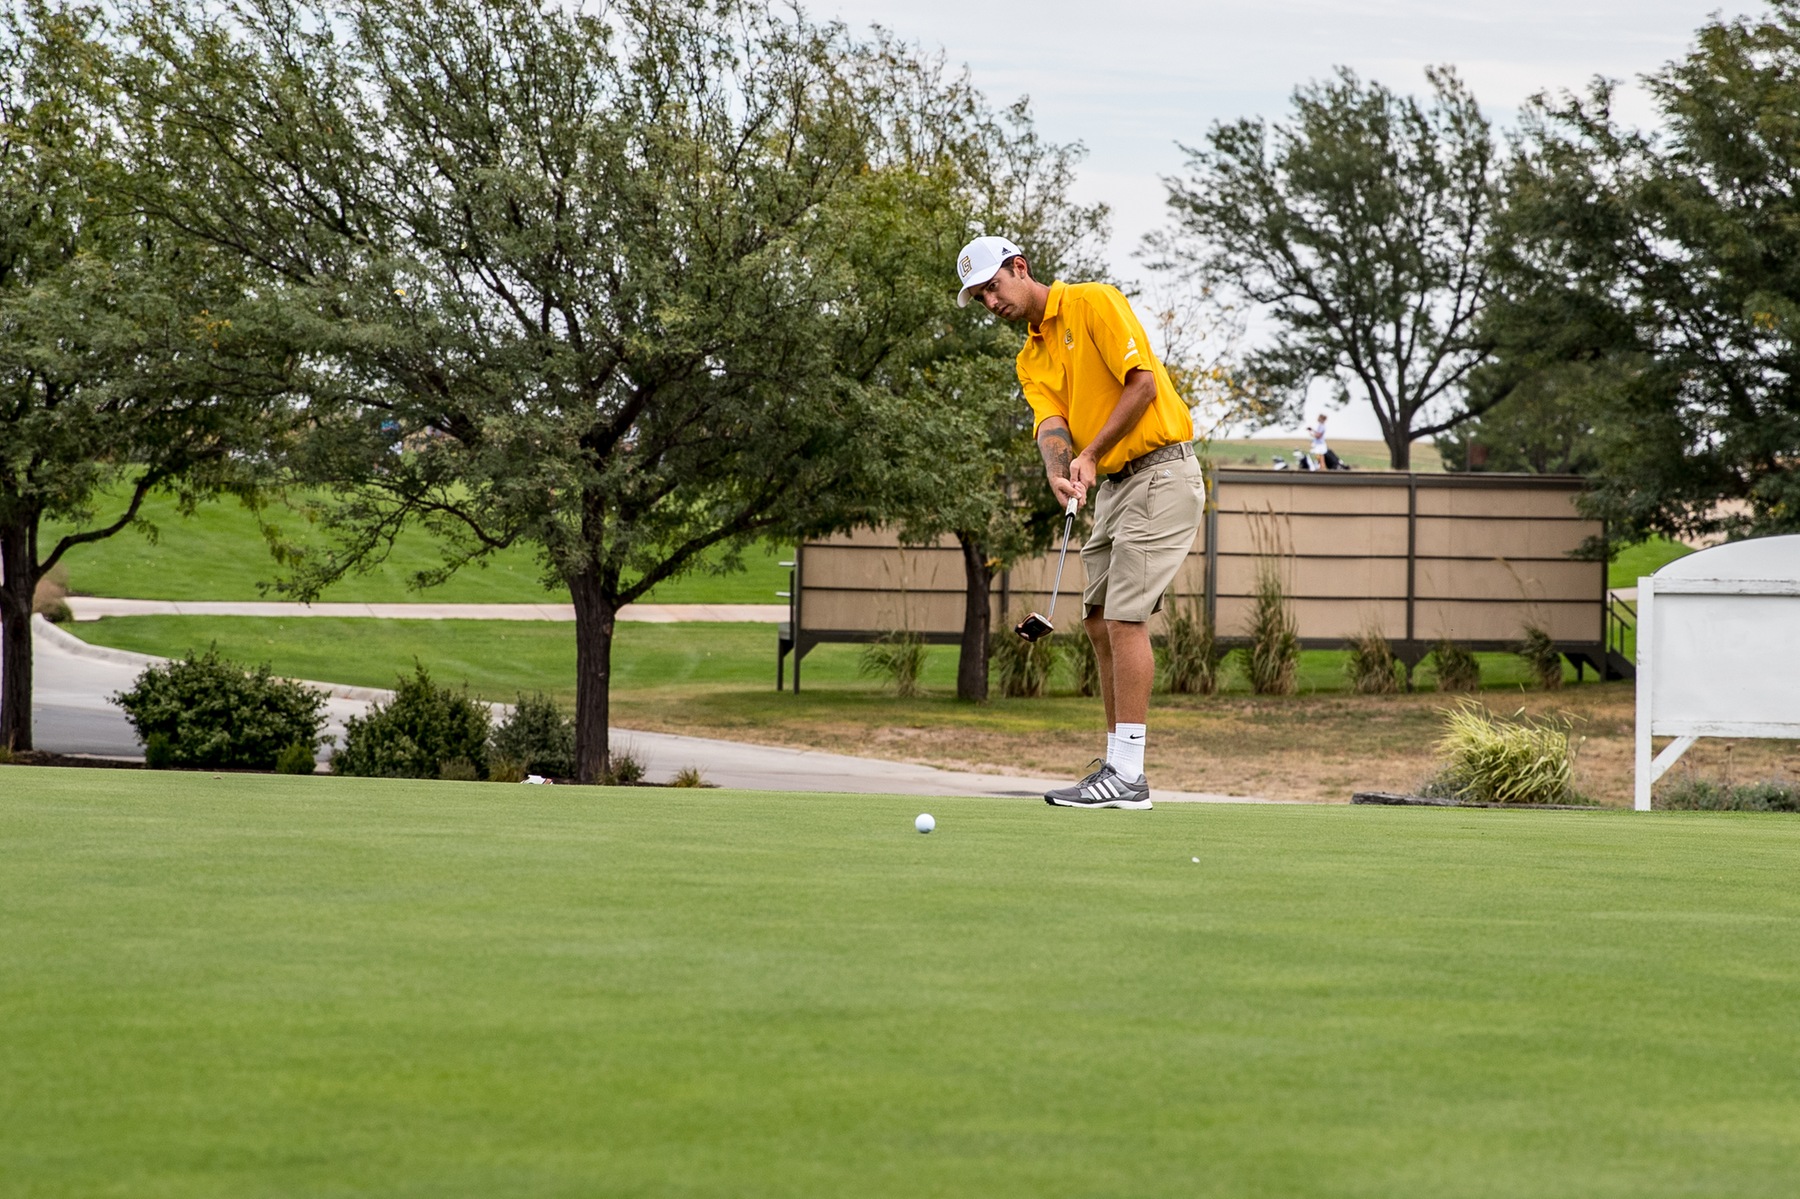 Broncbuster golf moves up three spots to No. 15